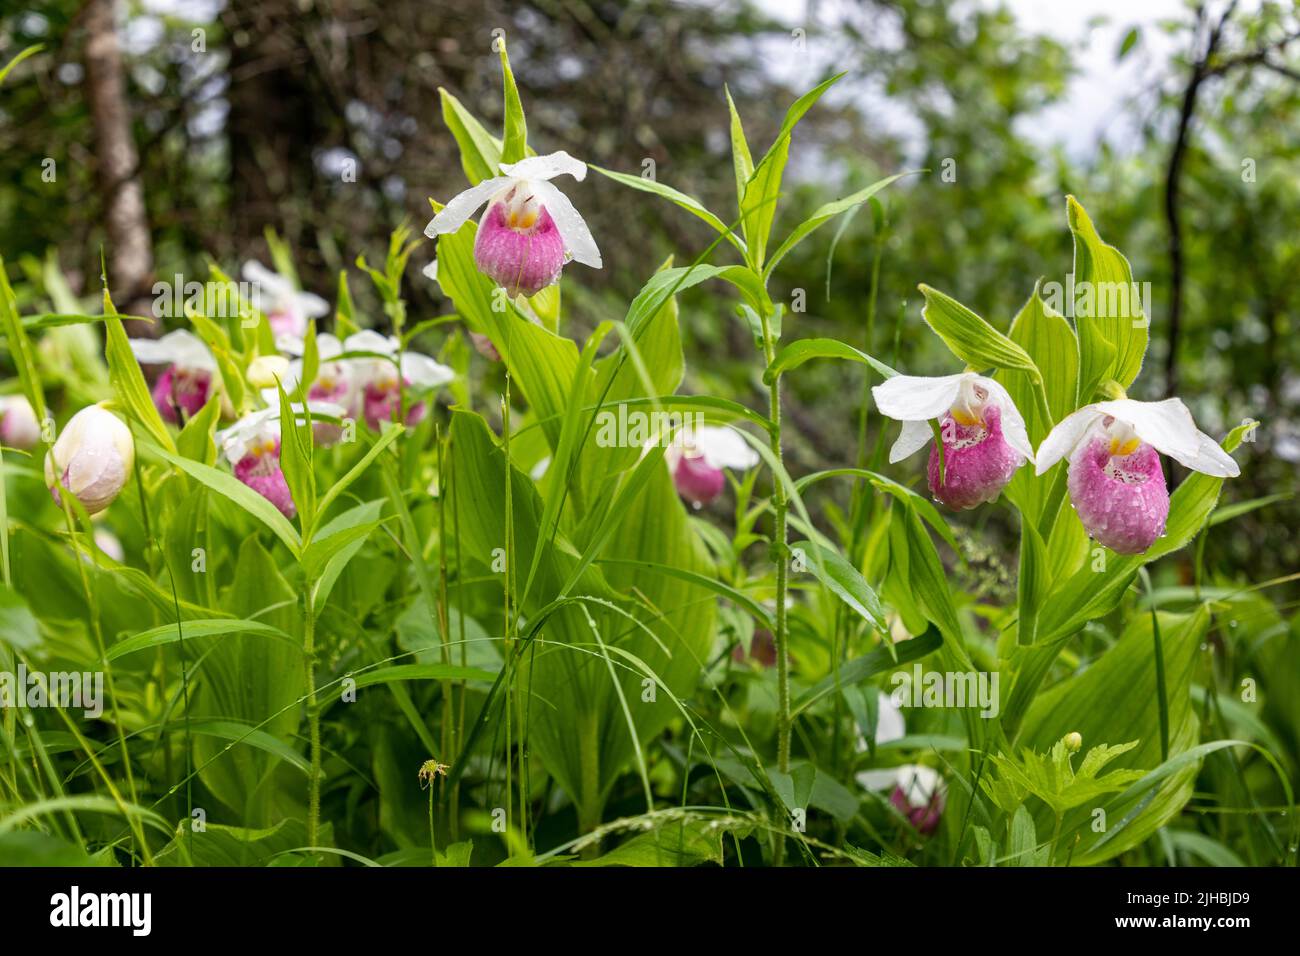 Showy Lady Slipper Orchid Flowers Growing Wild in Minnesota Northwoods Wilderness Area Stock Photo